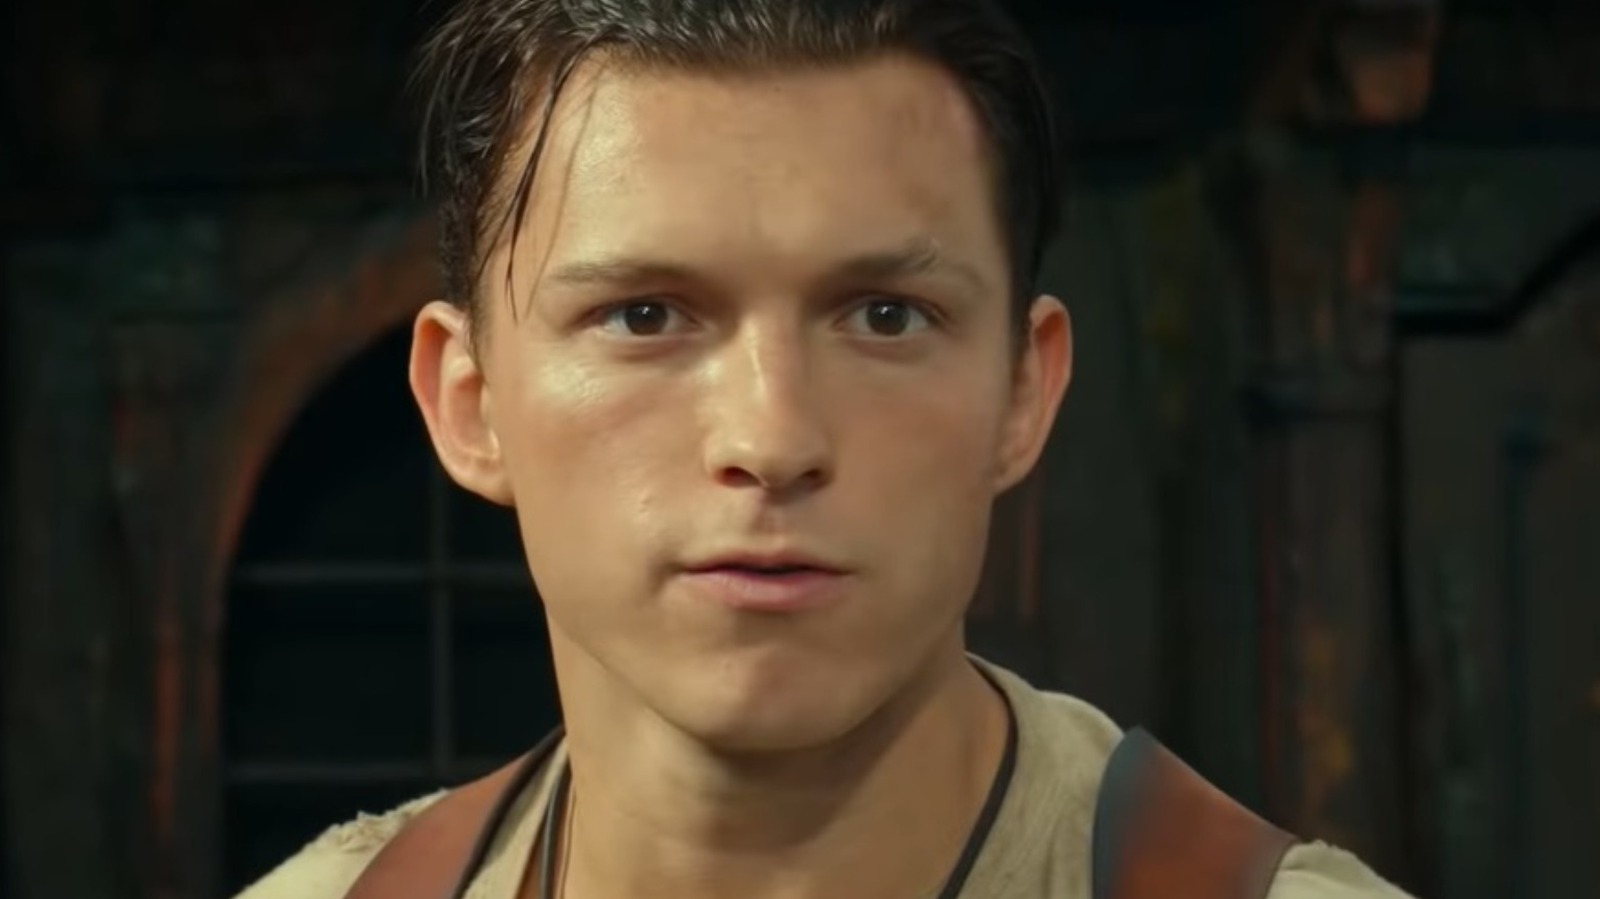 Tom Holland Preparing For Upcoming Uncharted Movie Role